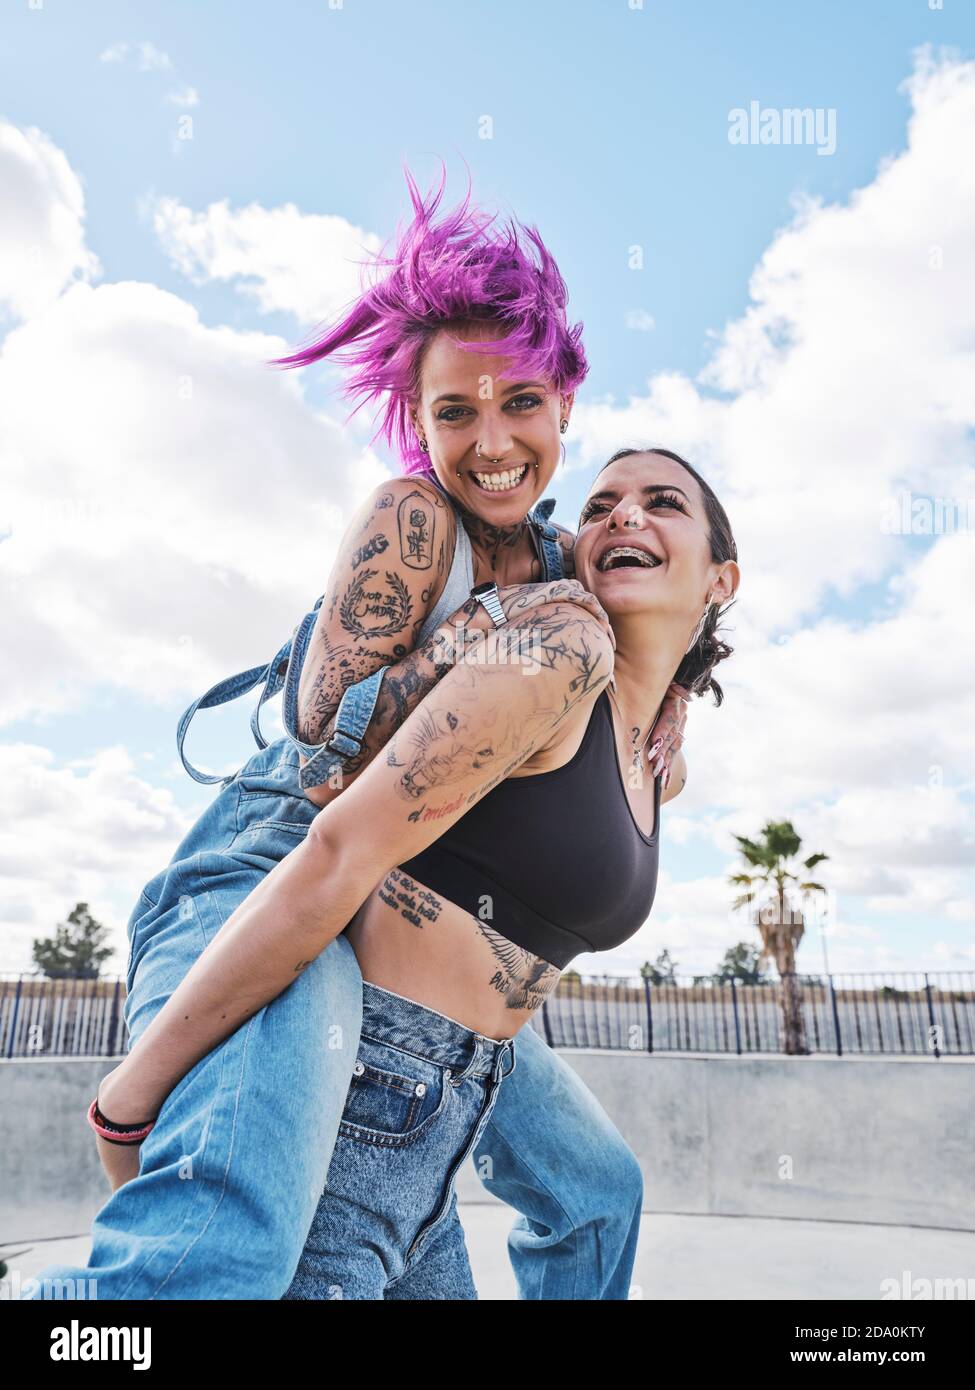 Low angle of delighted Woman with pink hair piggybacking cheerful female friend with tattoos while having fun together at weekend Stock Photo